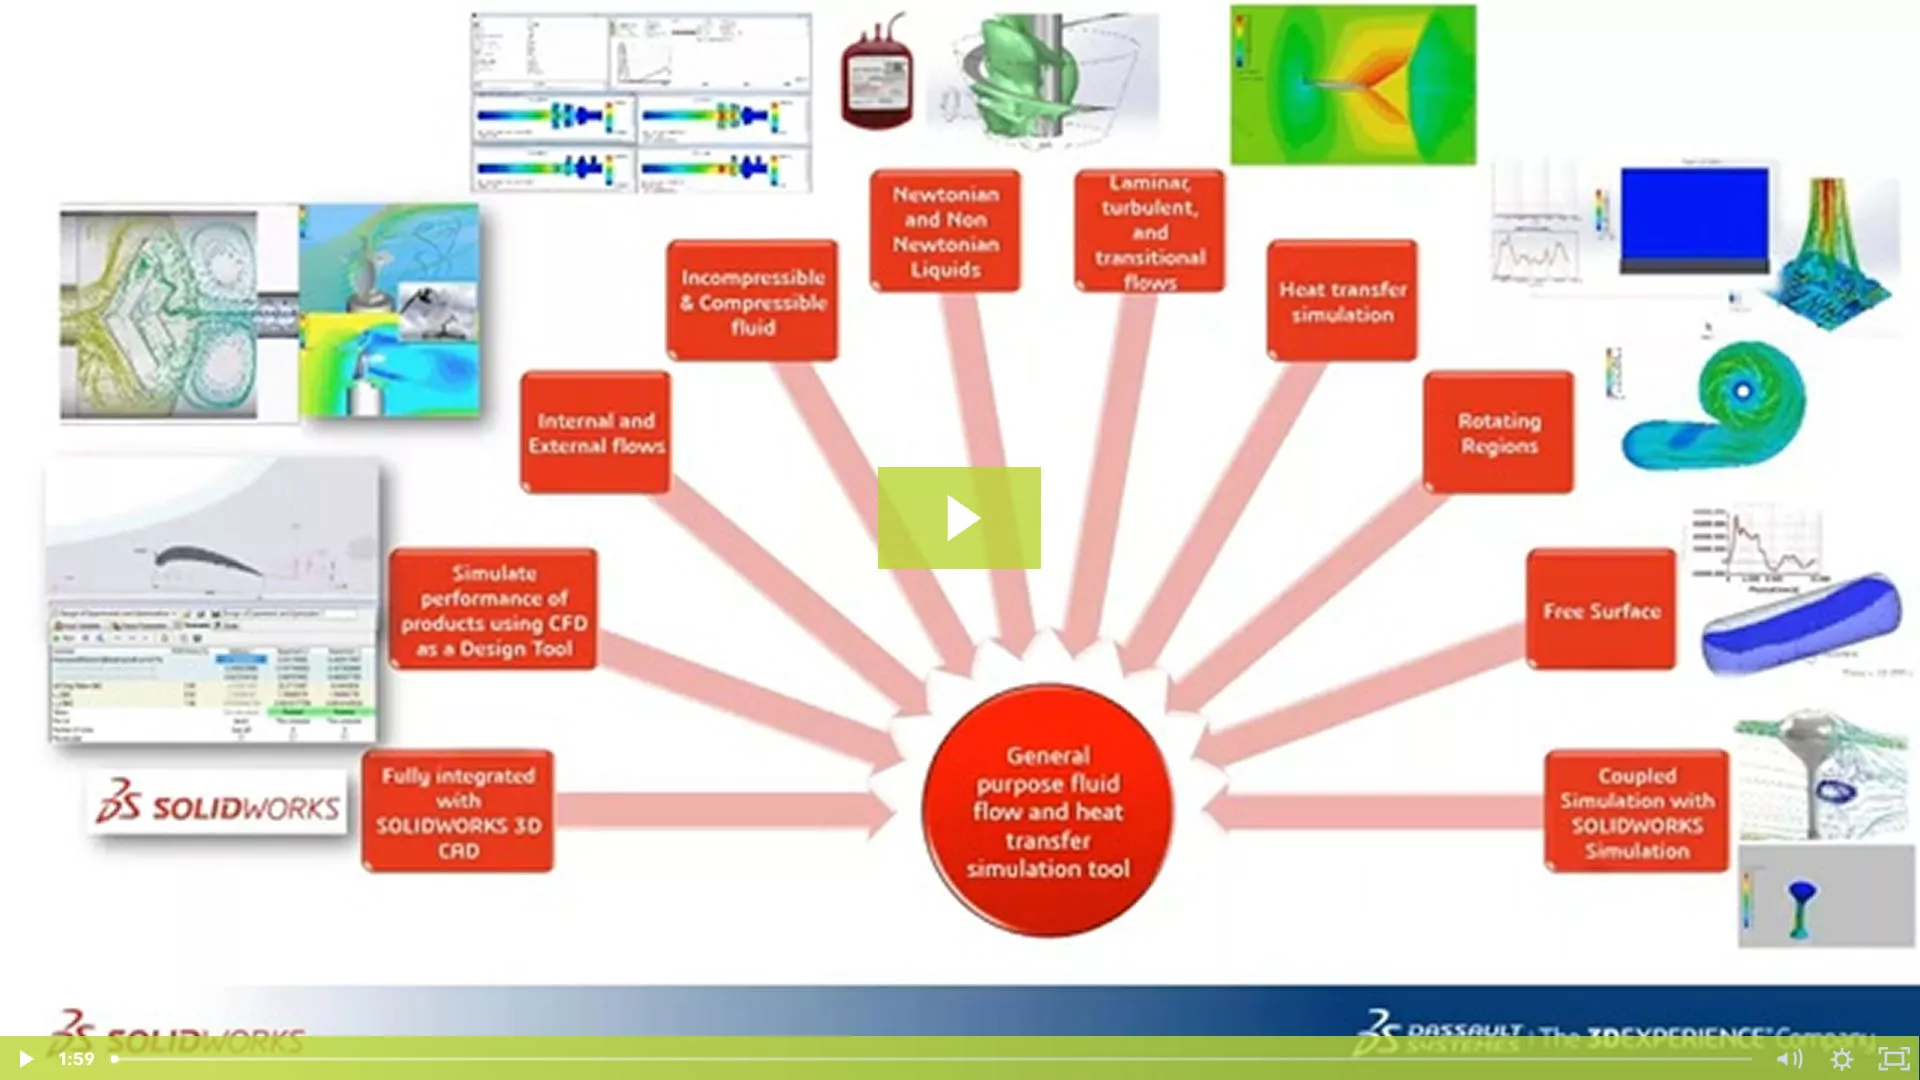 Screen capture from "Using CFD to Drive Product Performance"